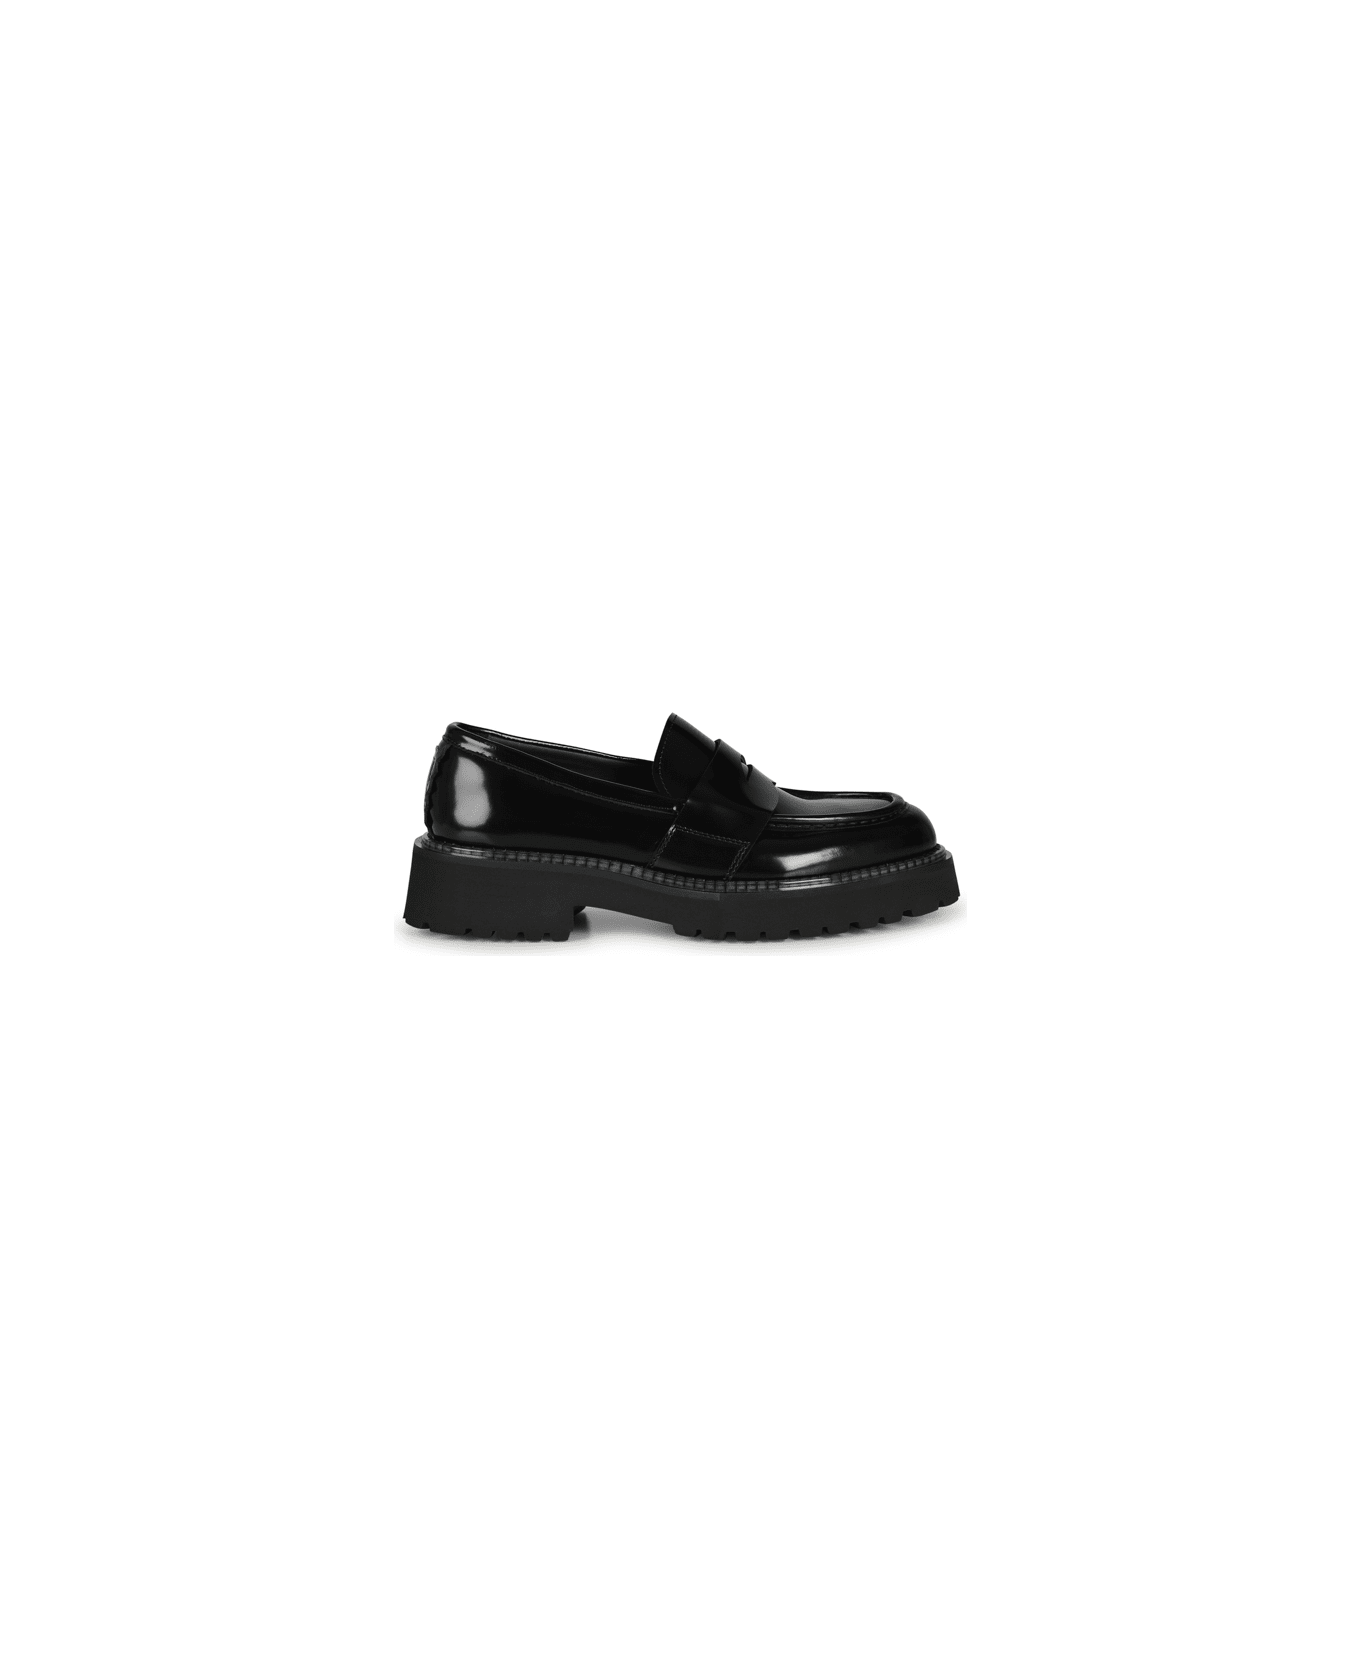 The Antipode Patent Leather Loafers - Black